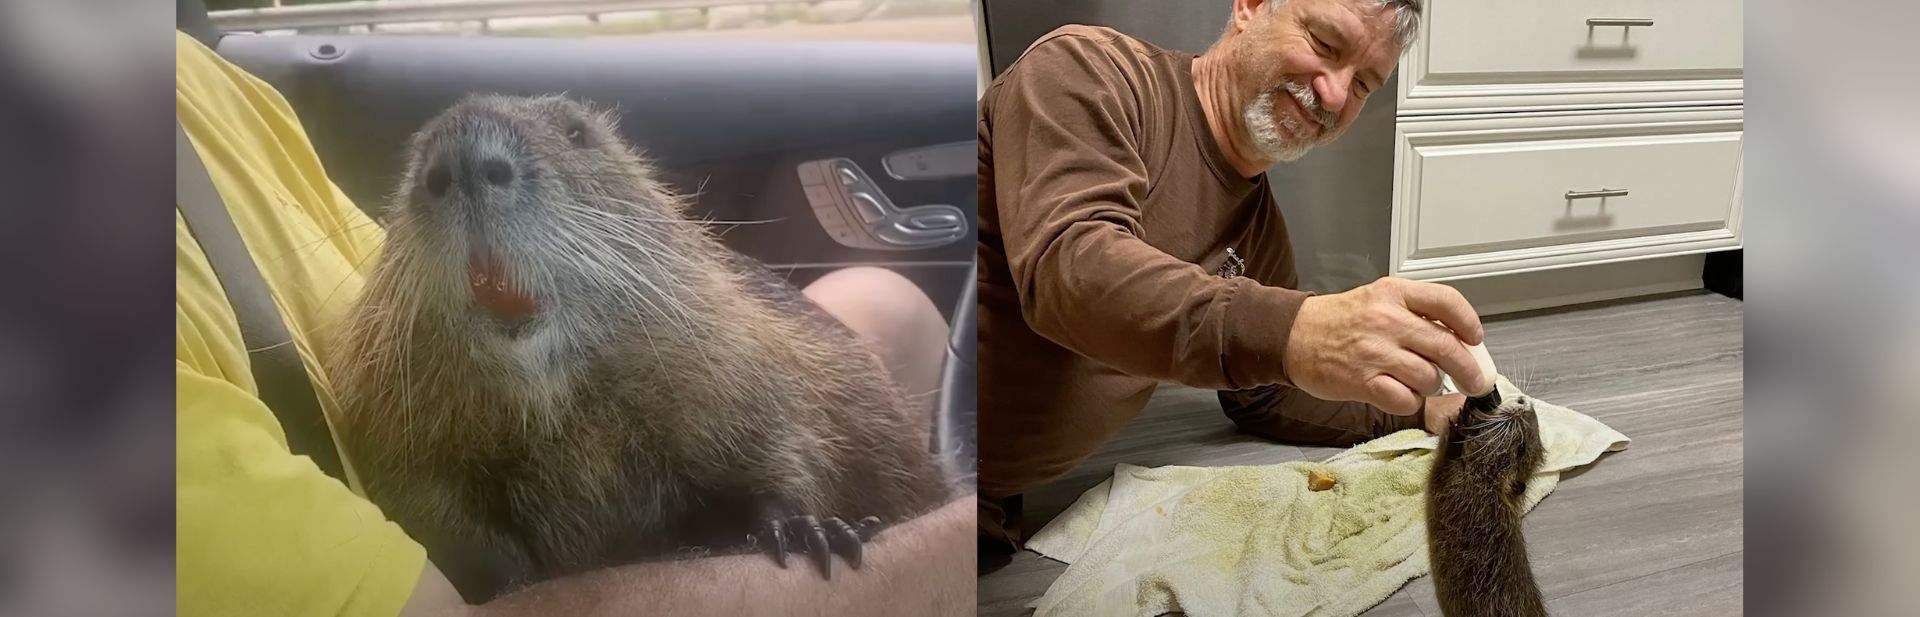 This Rescued Nutria Has a Favorite Human, and Their Bond is Incredible